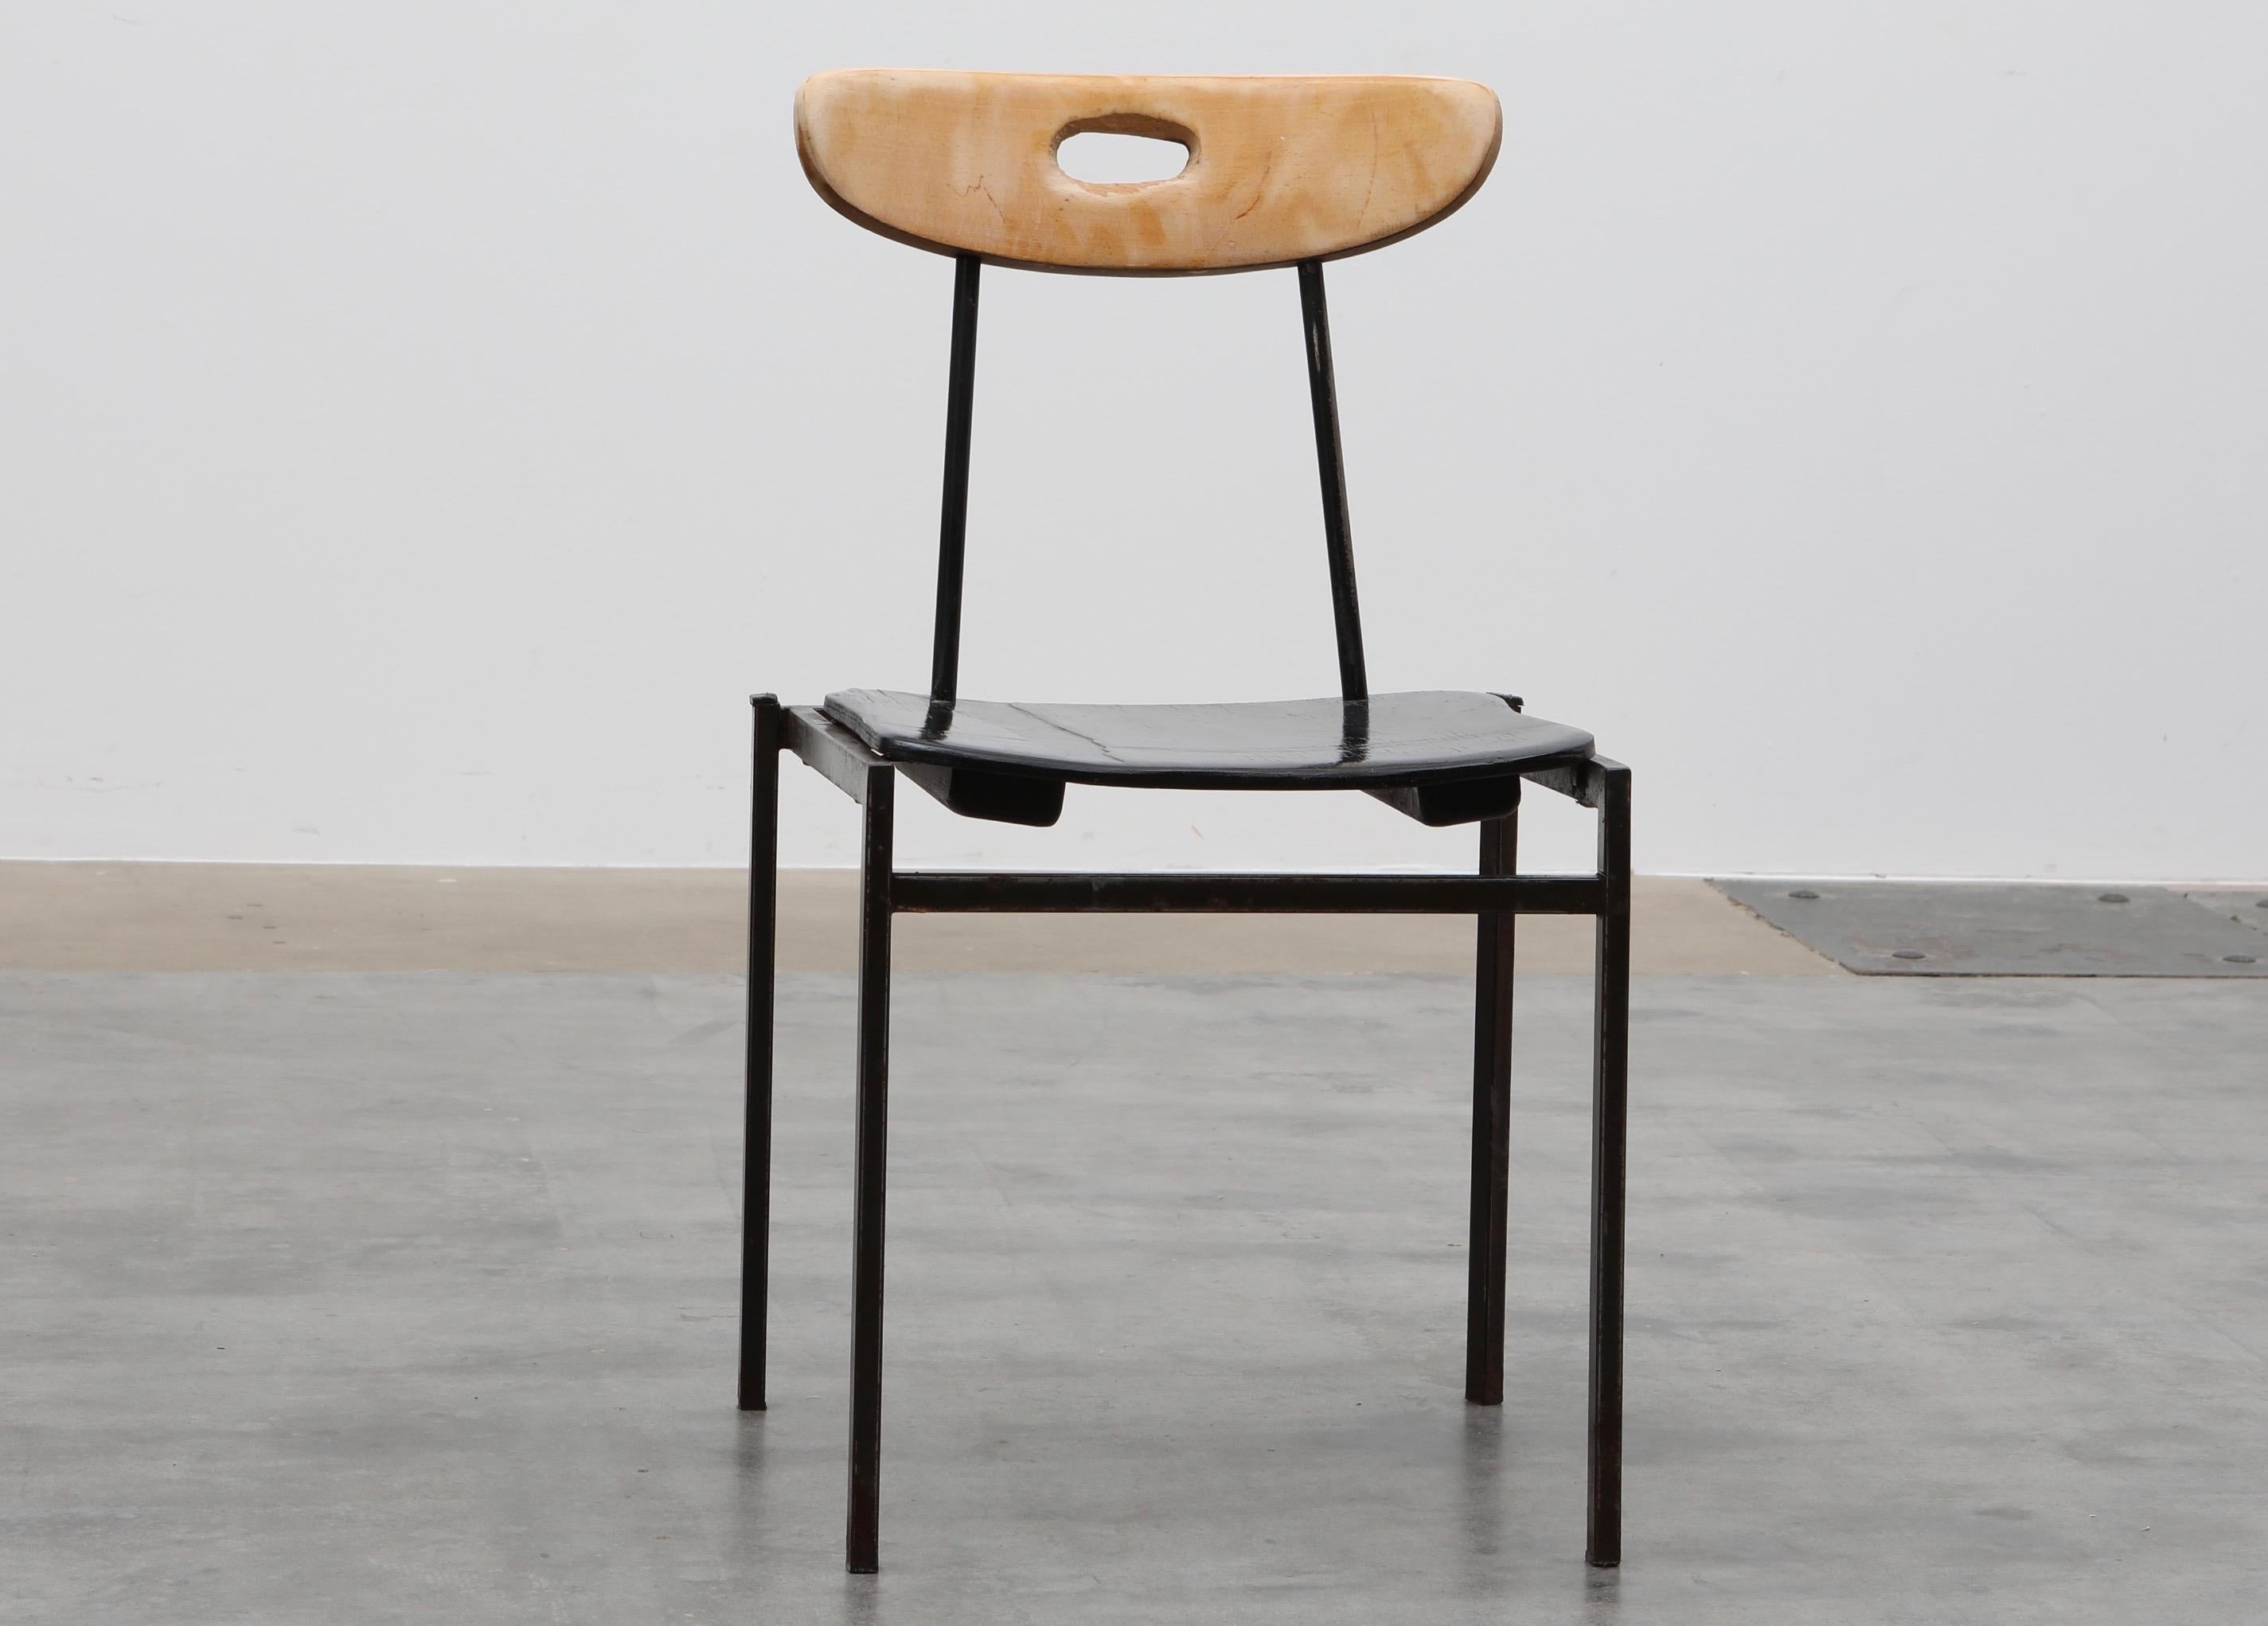 Mid-Century Modern Untitled Chair by Markus Friedrich Staab from the Black Is Beautiful Series